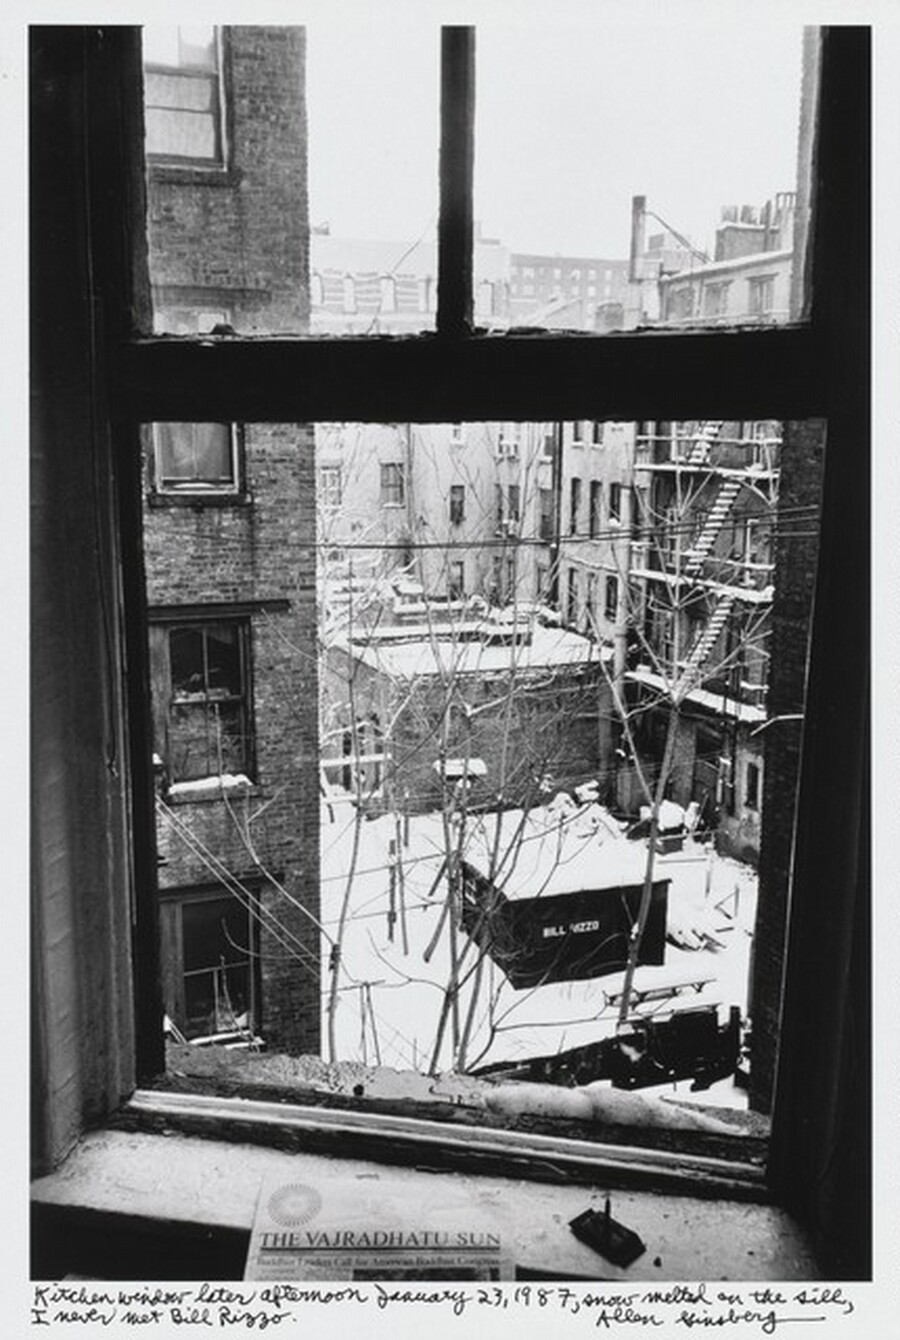 Allen Ginsberg, Kitchen window later afternoon January 23, 1987, snow melted on the sill, I never met Bill Rizzo., 1987